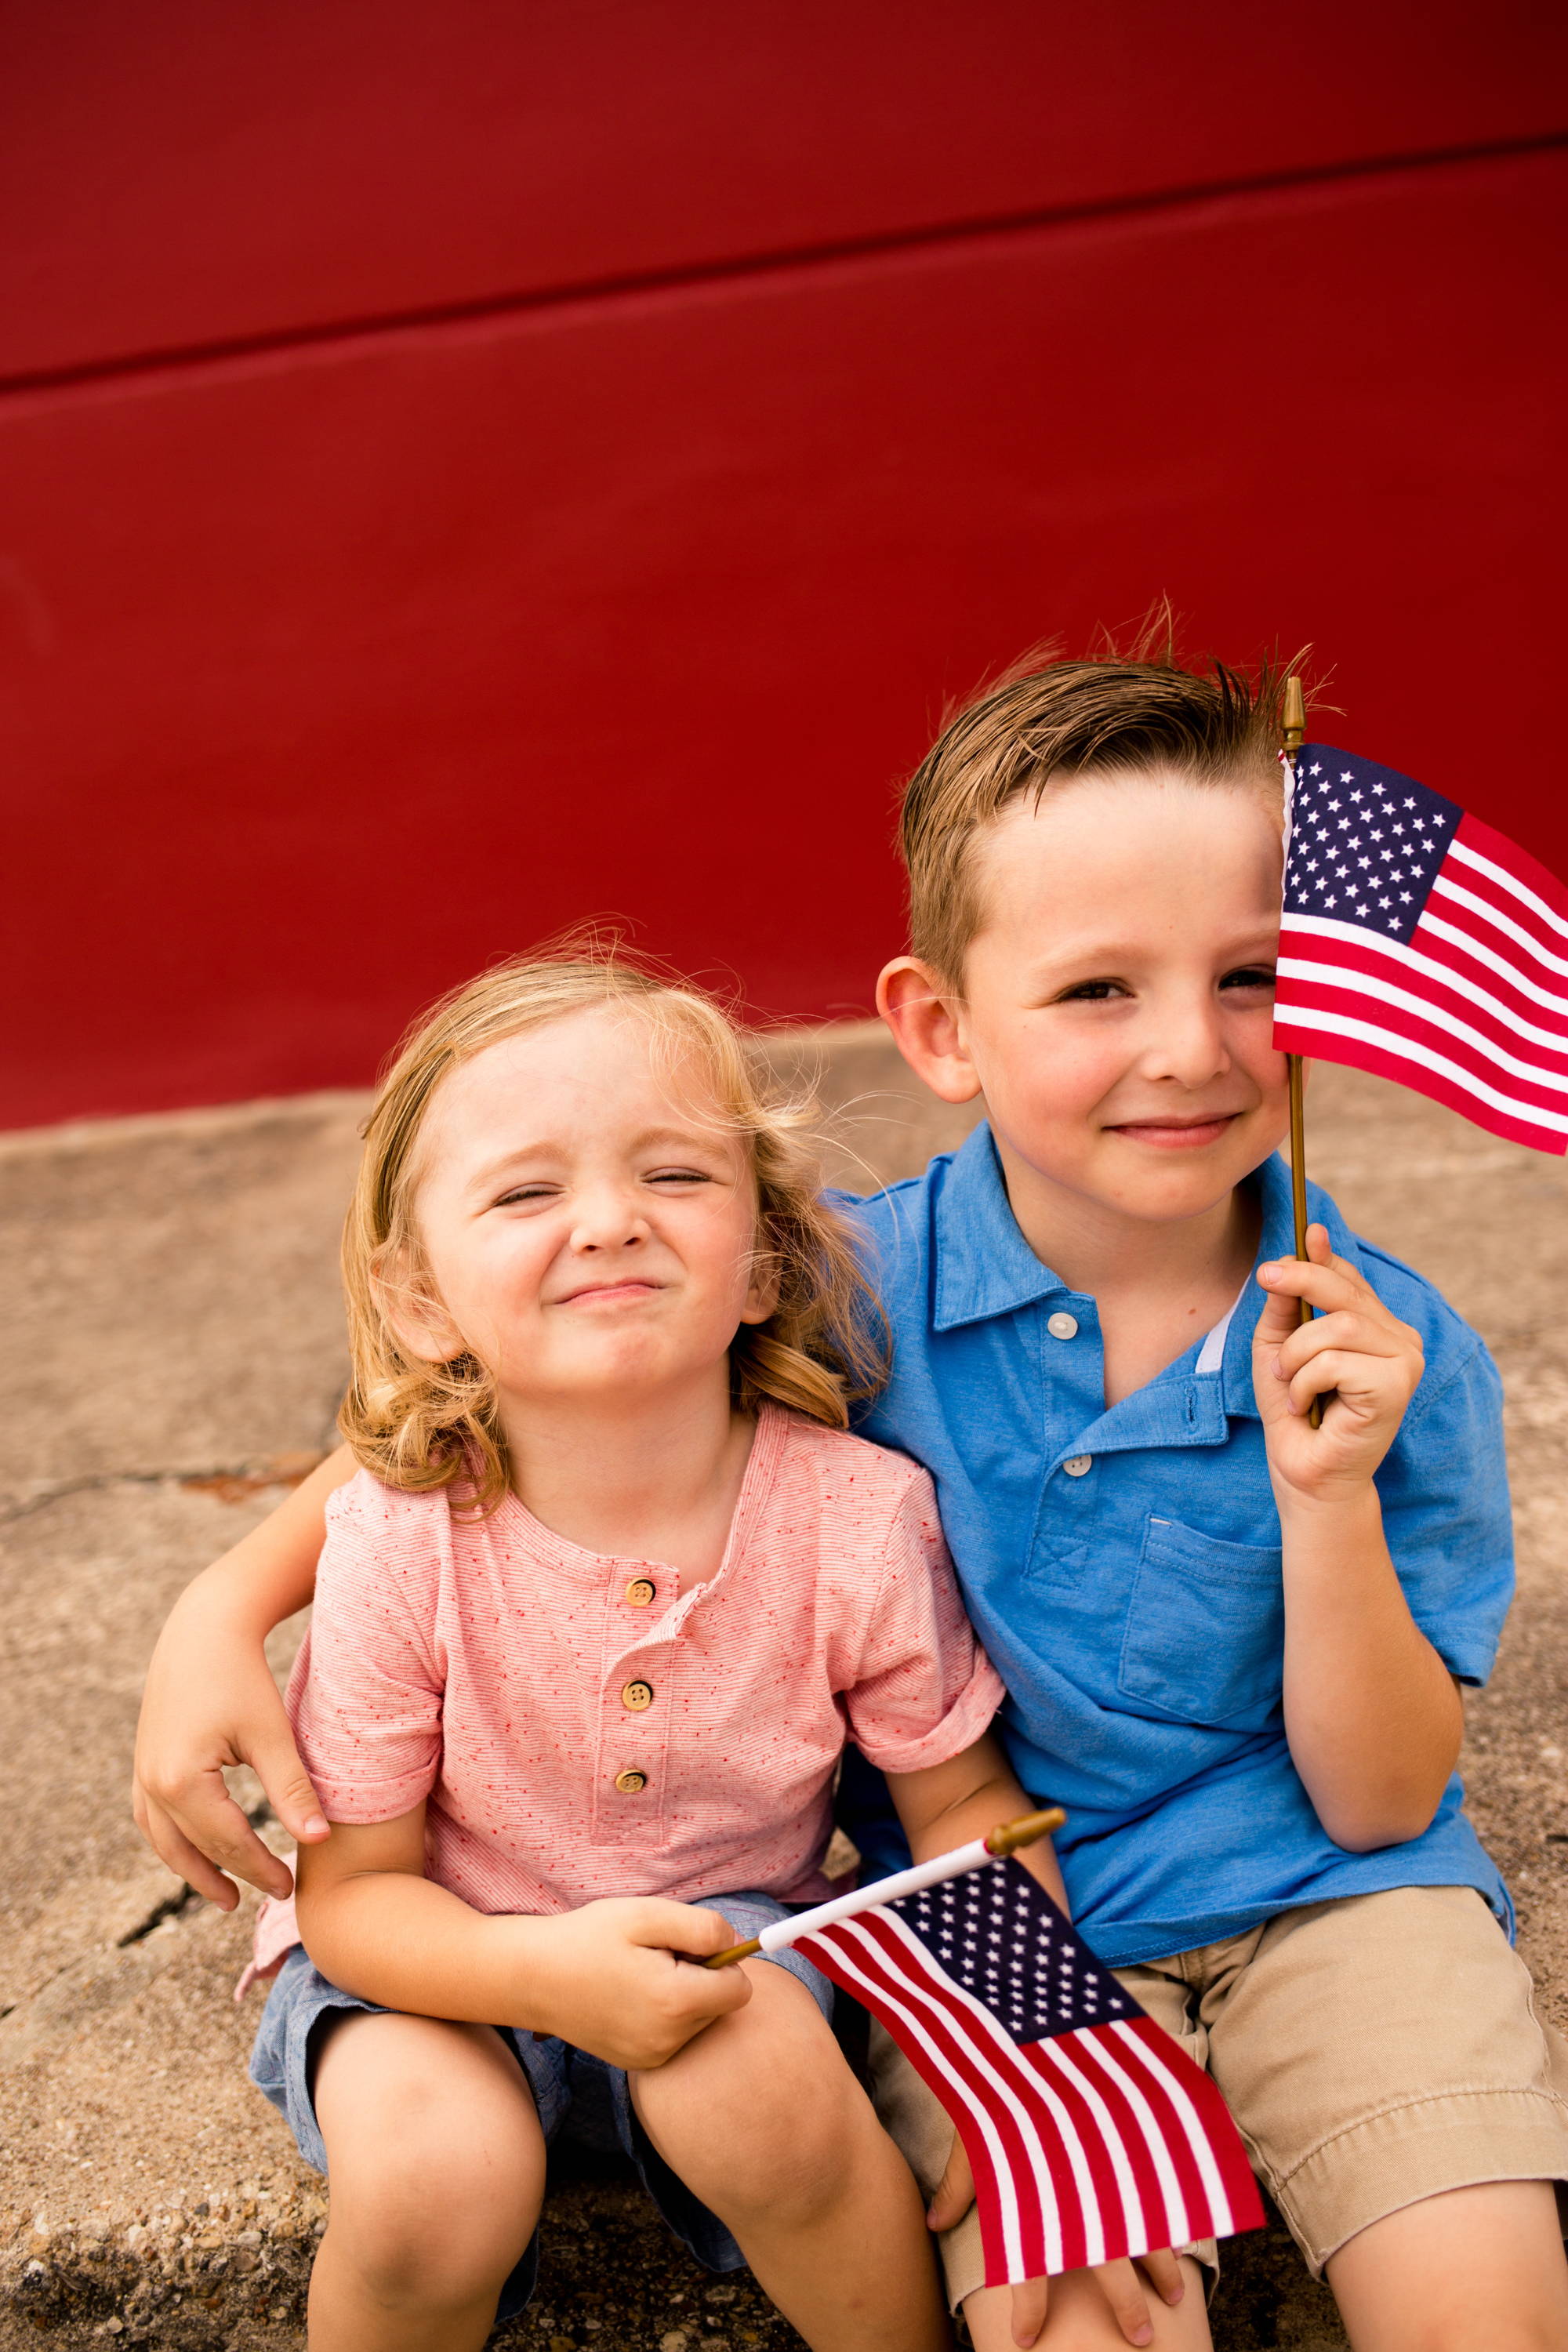 little boy and girl holding miniature American flags, smiling, happy, Fourth of July celebration